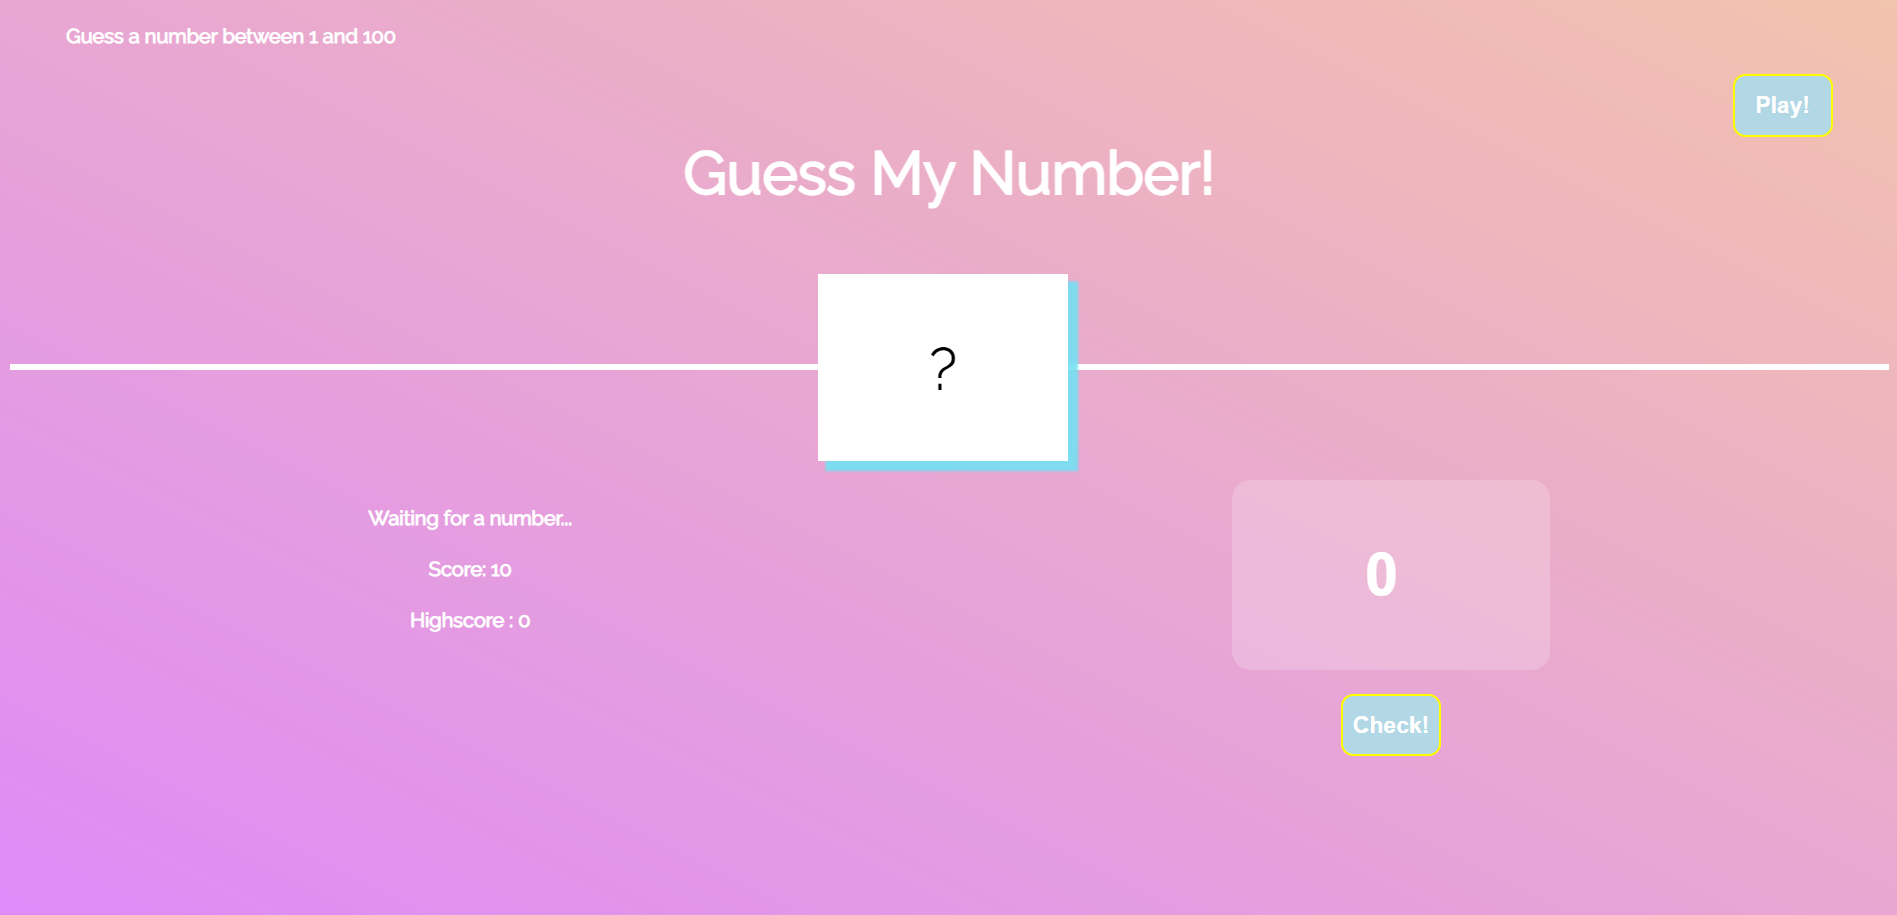 Guess the Number!